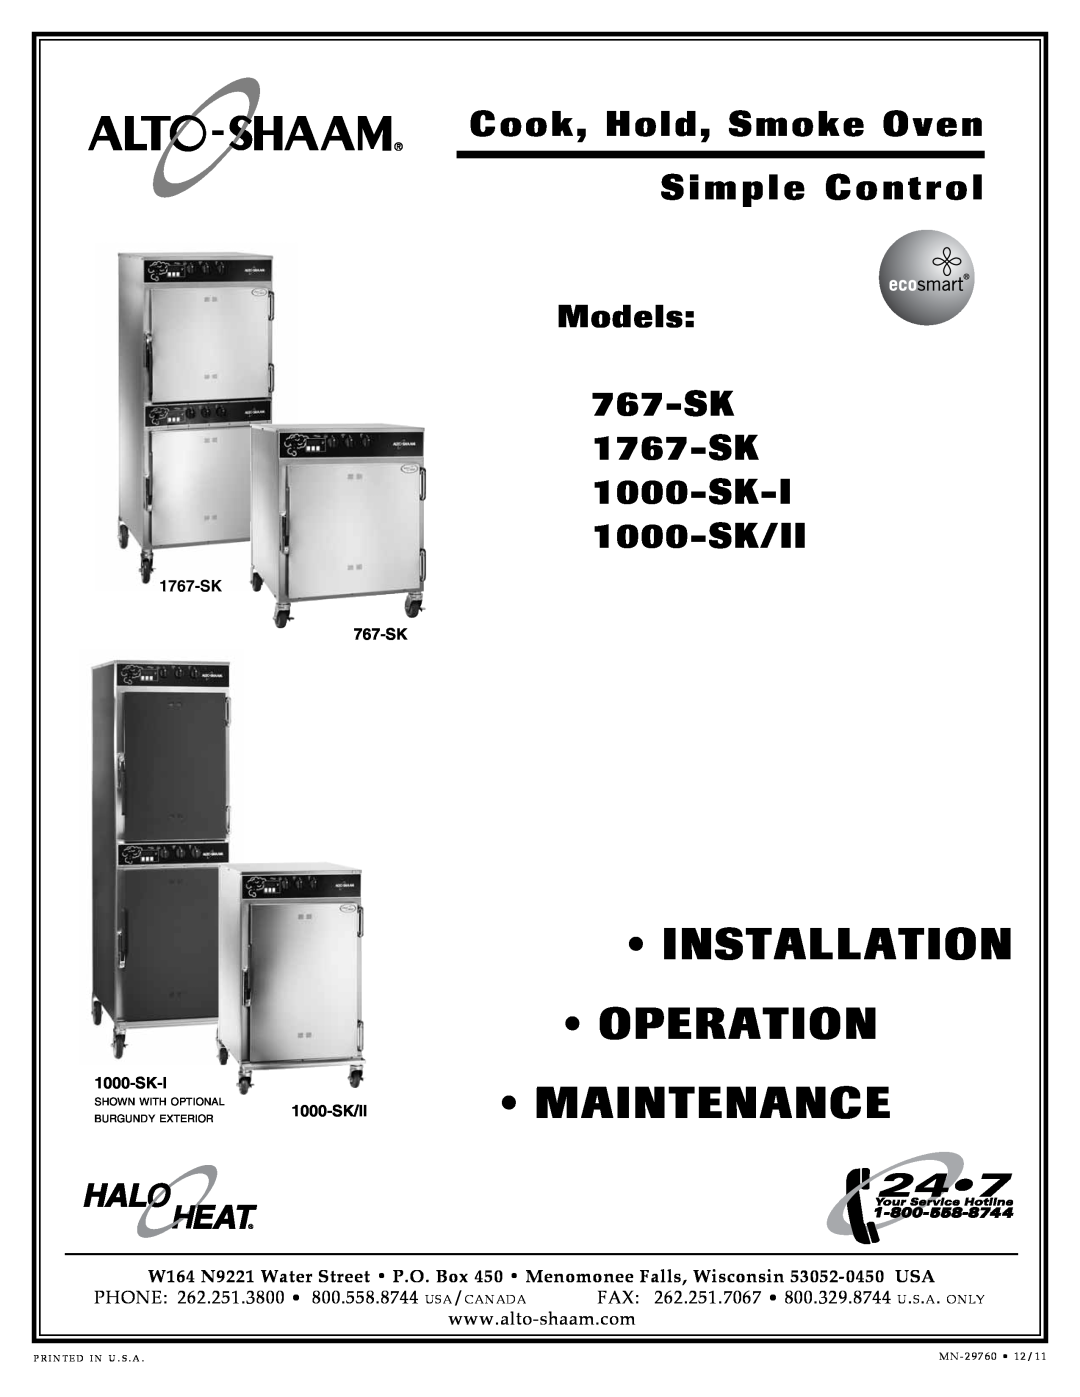 Alto-Shaam 1000-SK-I manual Installation, Operation, Maintenance, Models, Cook, Hold, Smoke Oven, Simple Control, 767-SK 